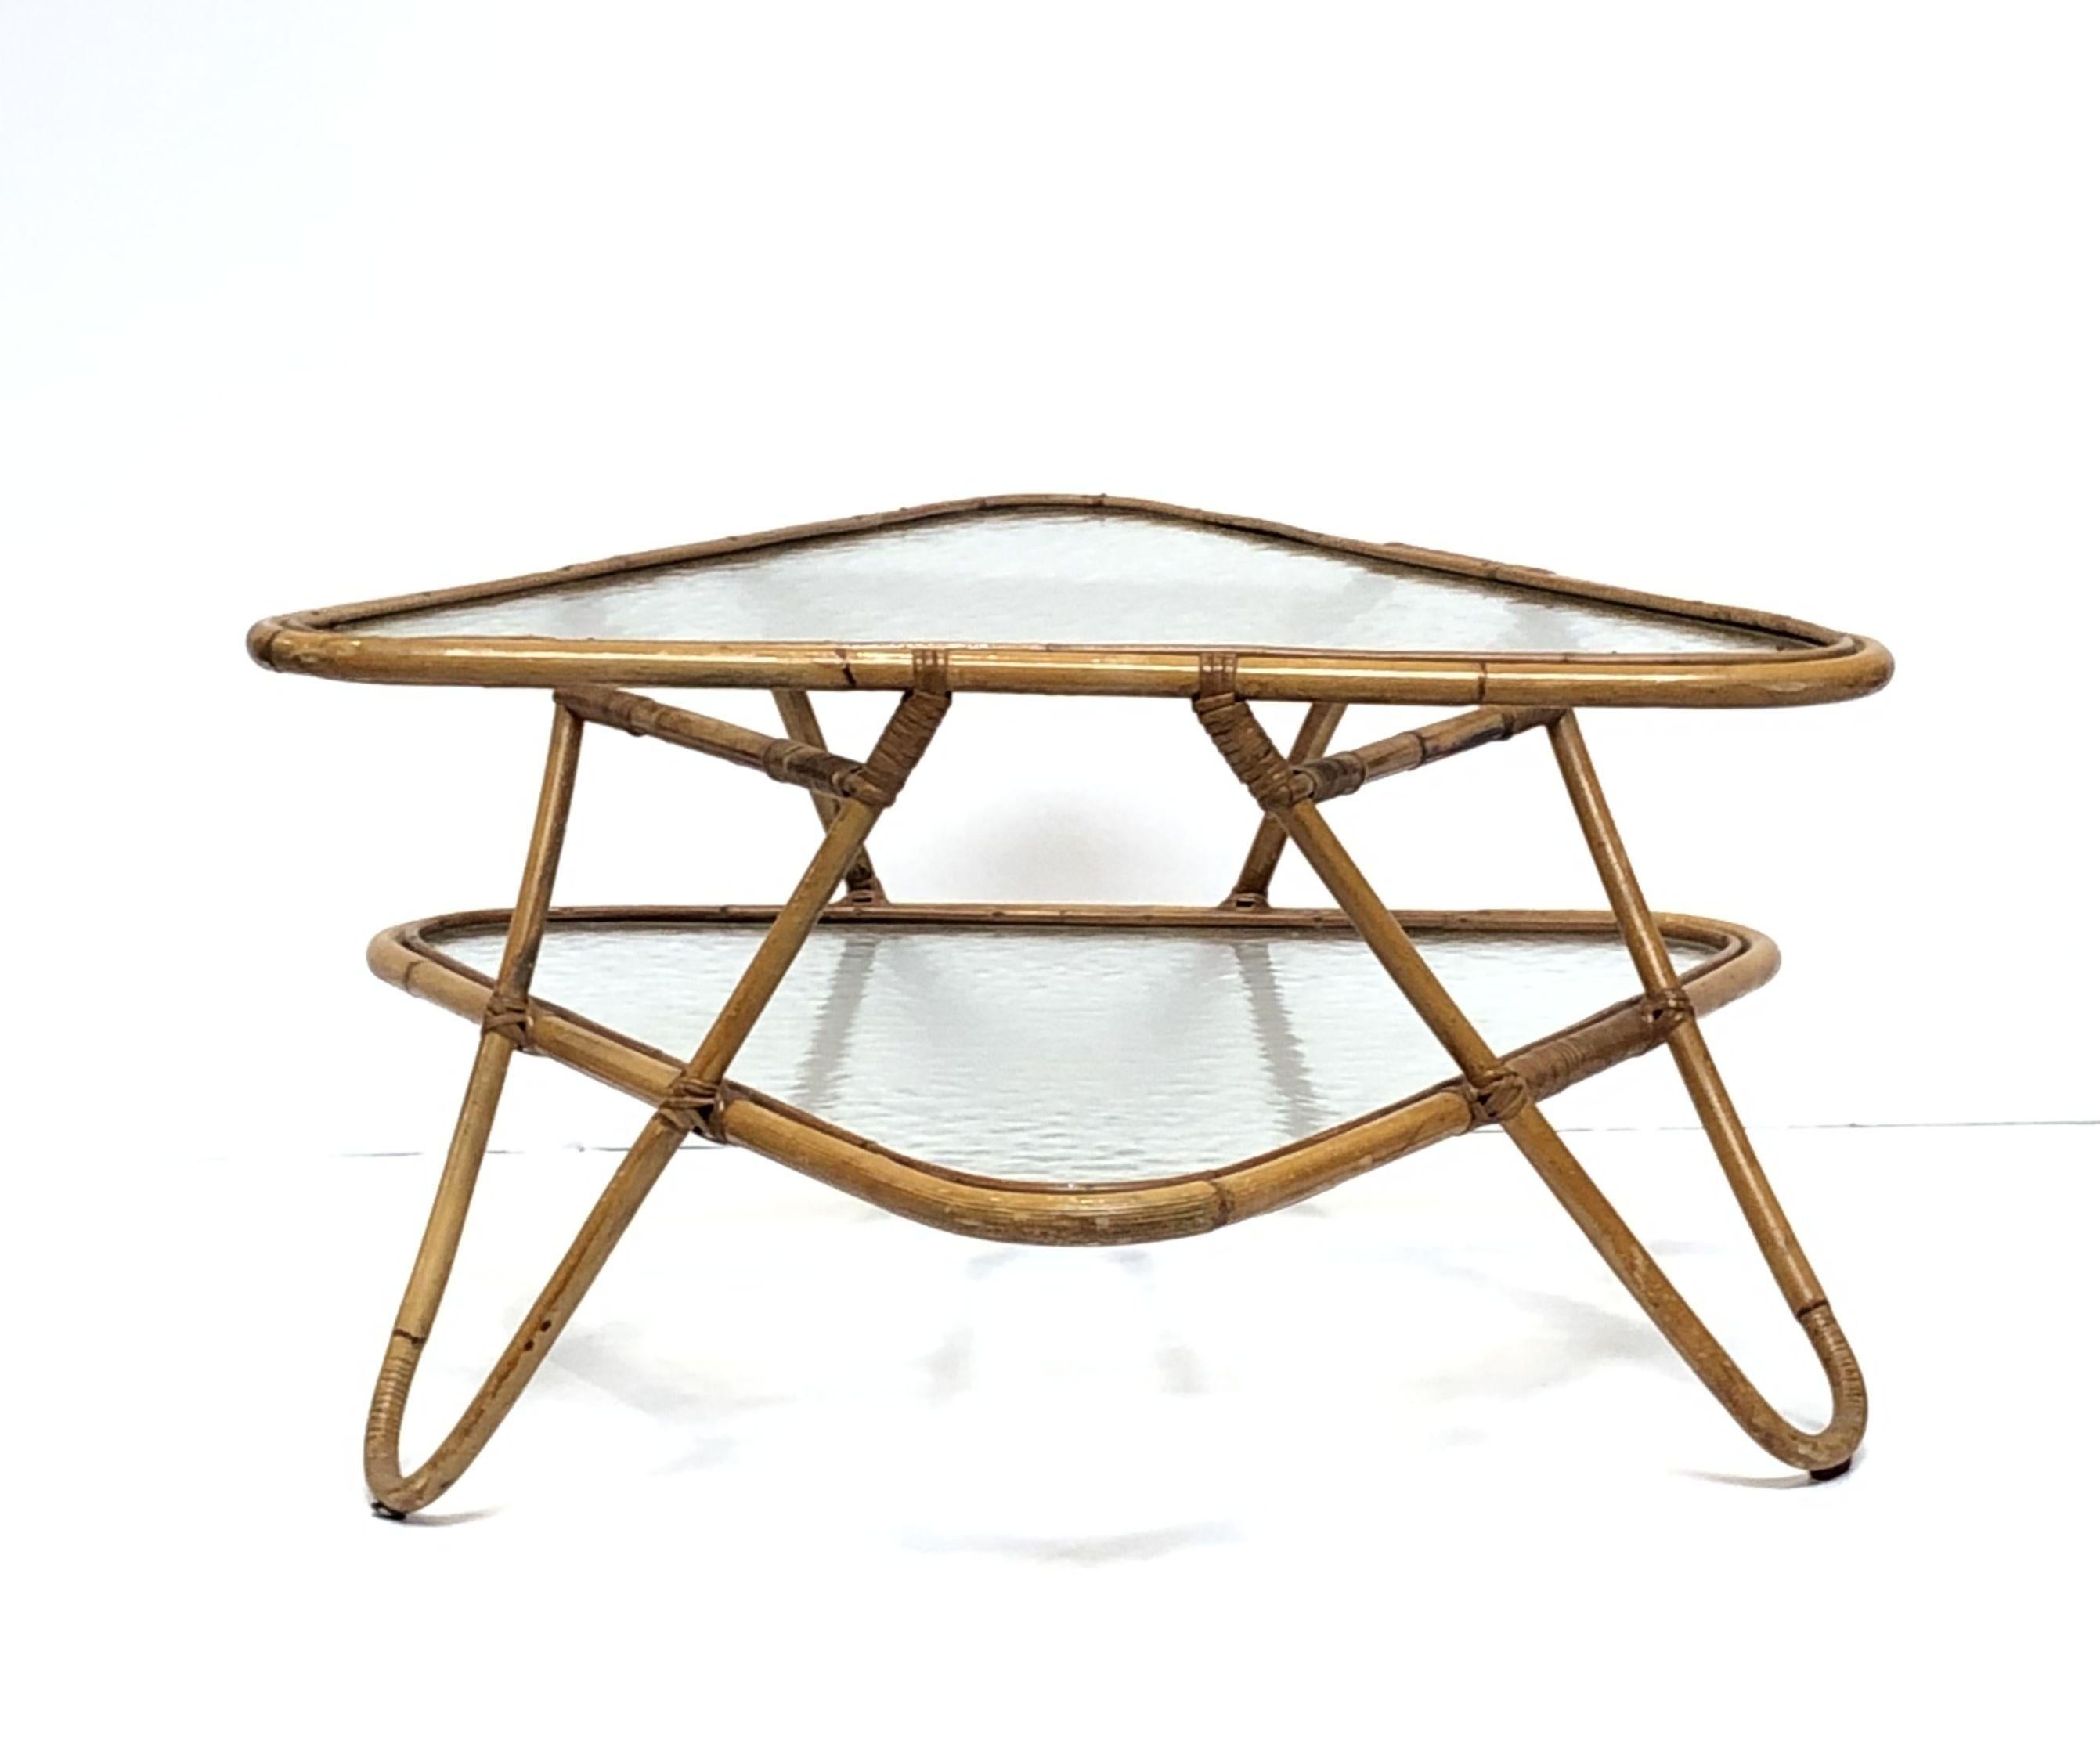 20th Century French Rattan Midcentury Accent or Low Table of Cane, Bamboo and Glass